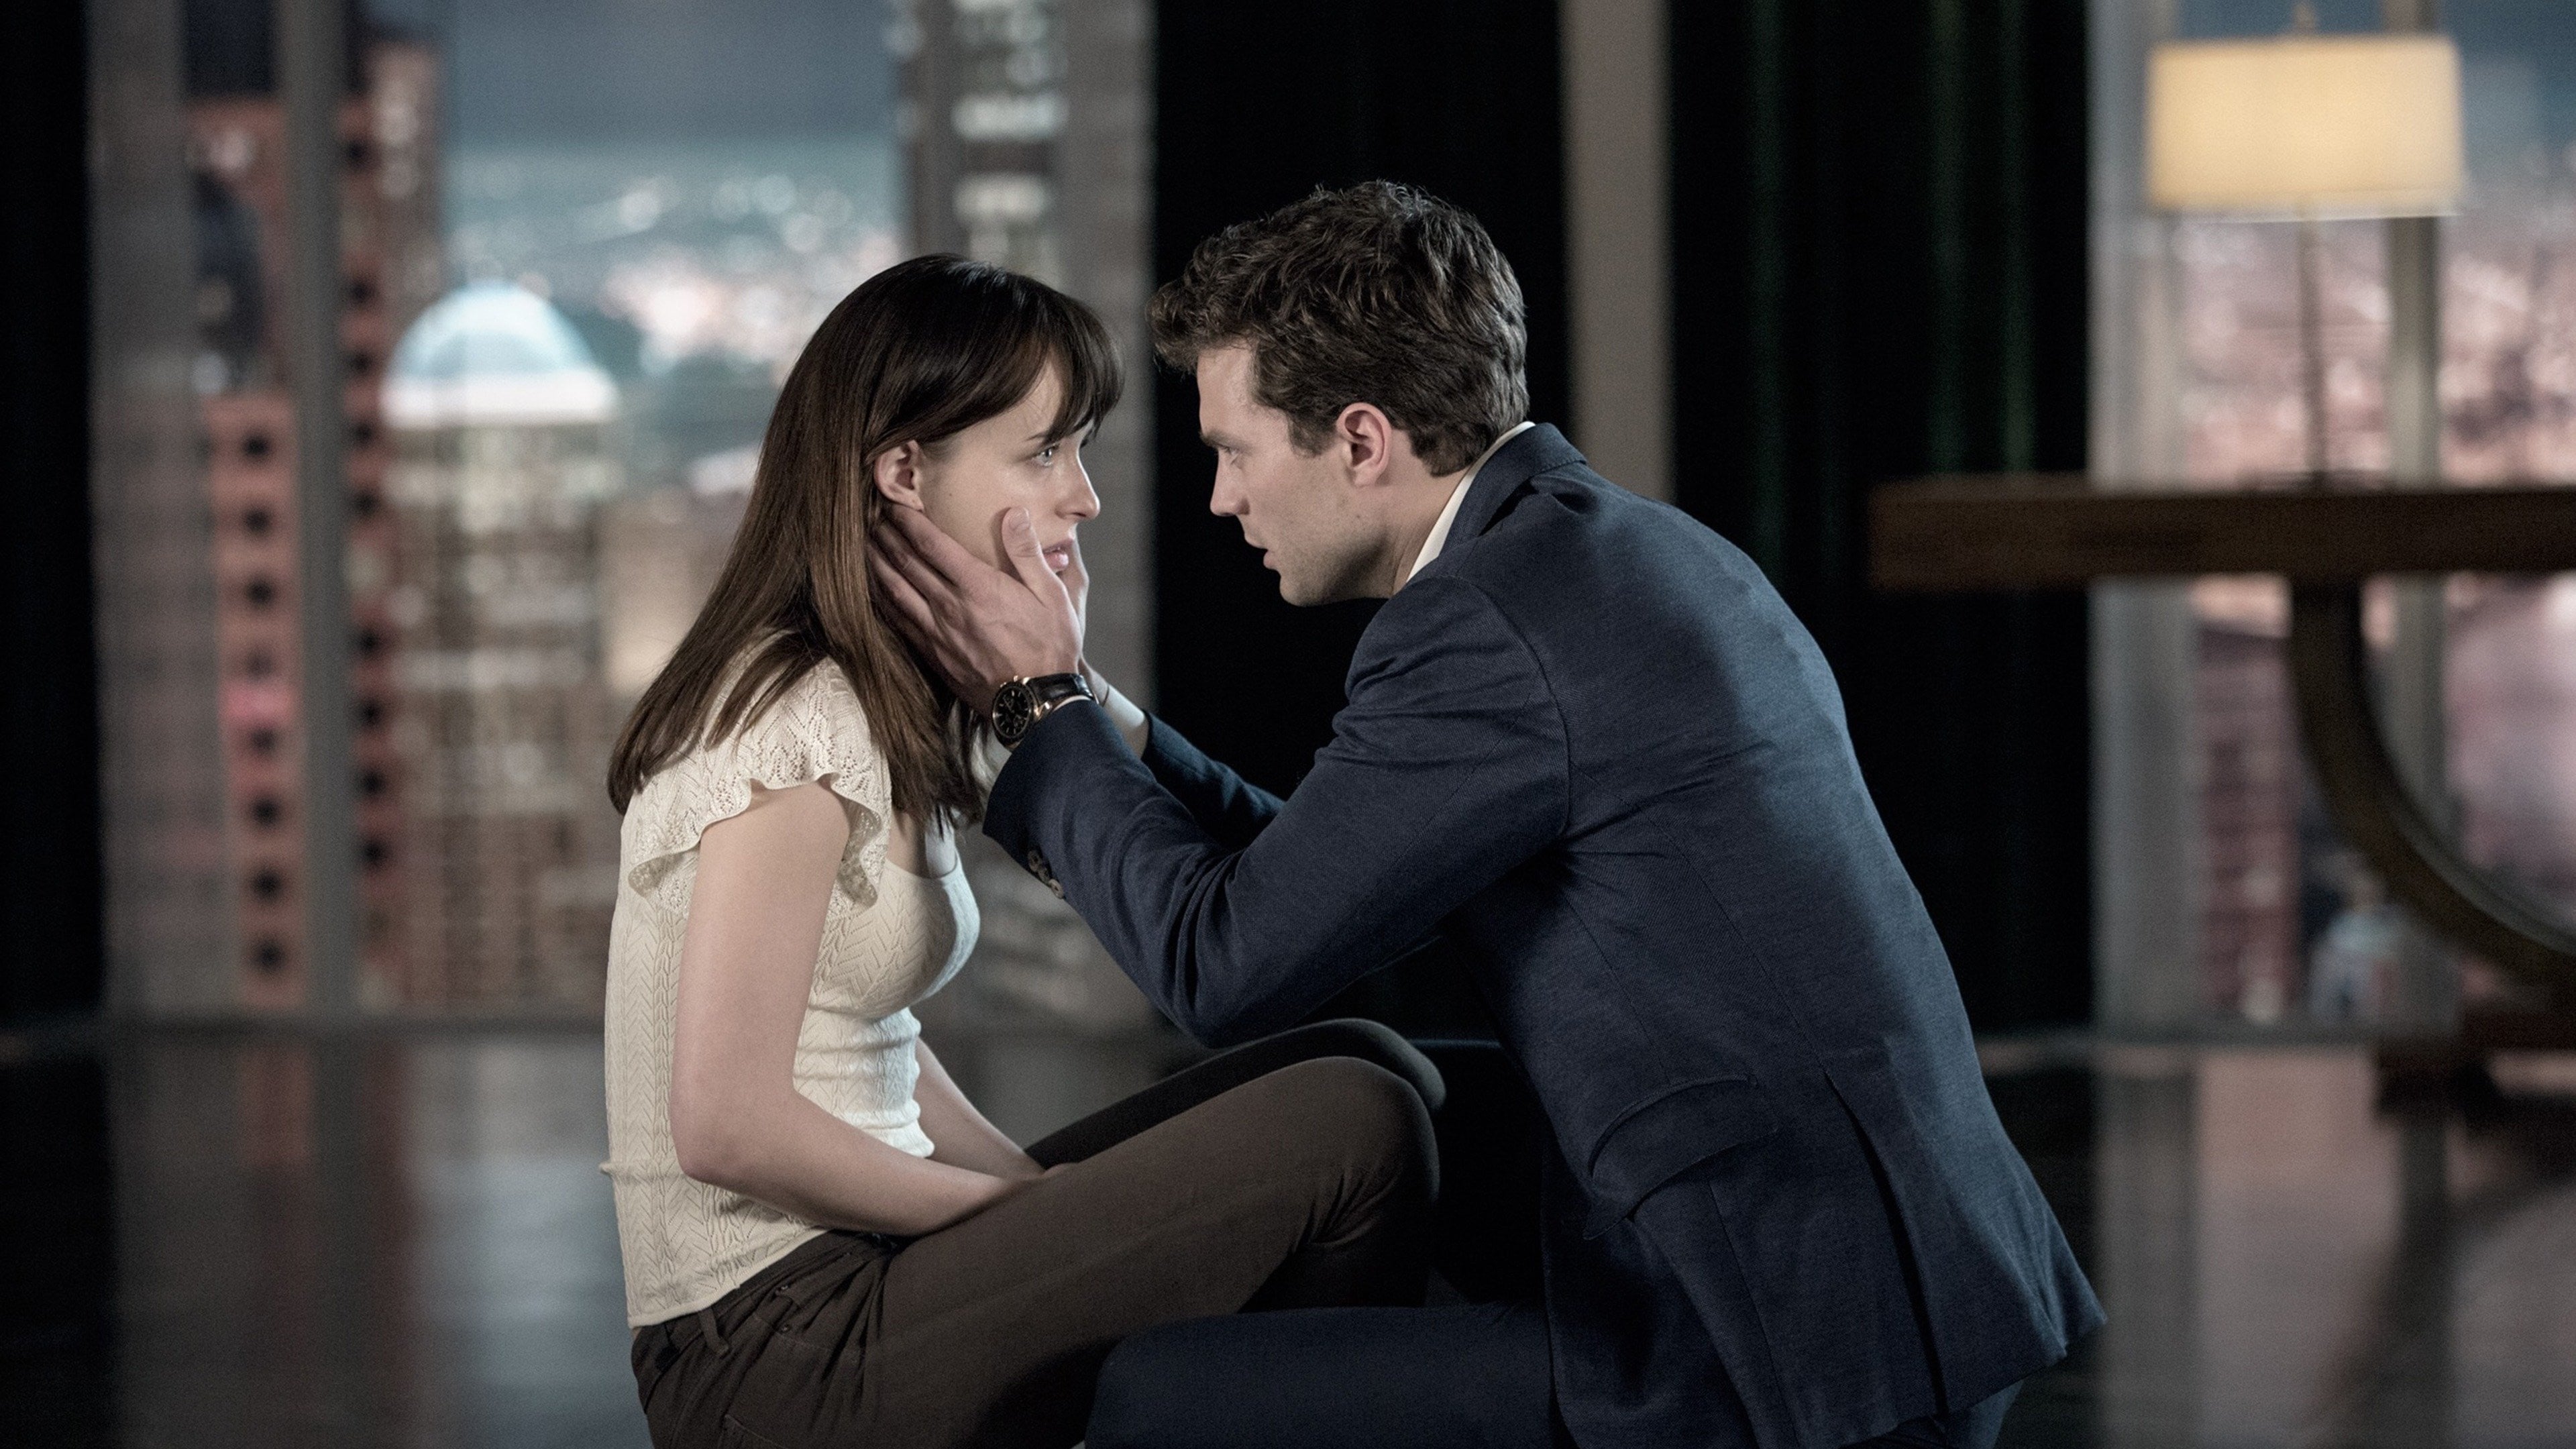 fifty shades of grey movie or book